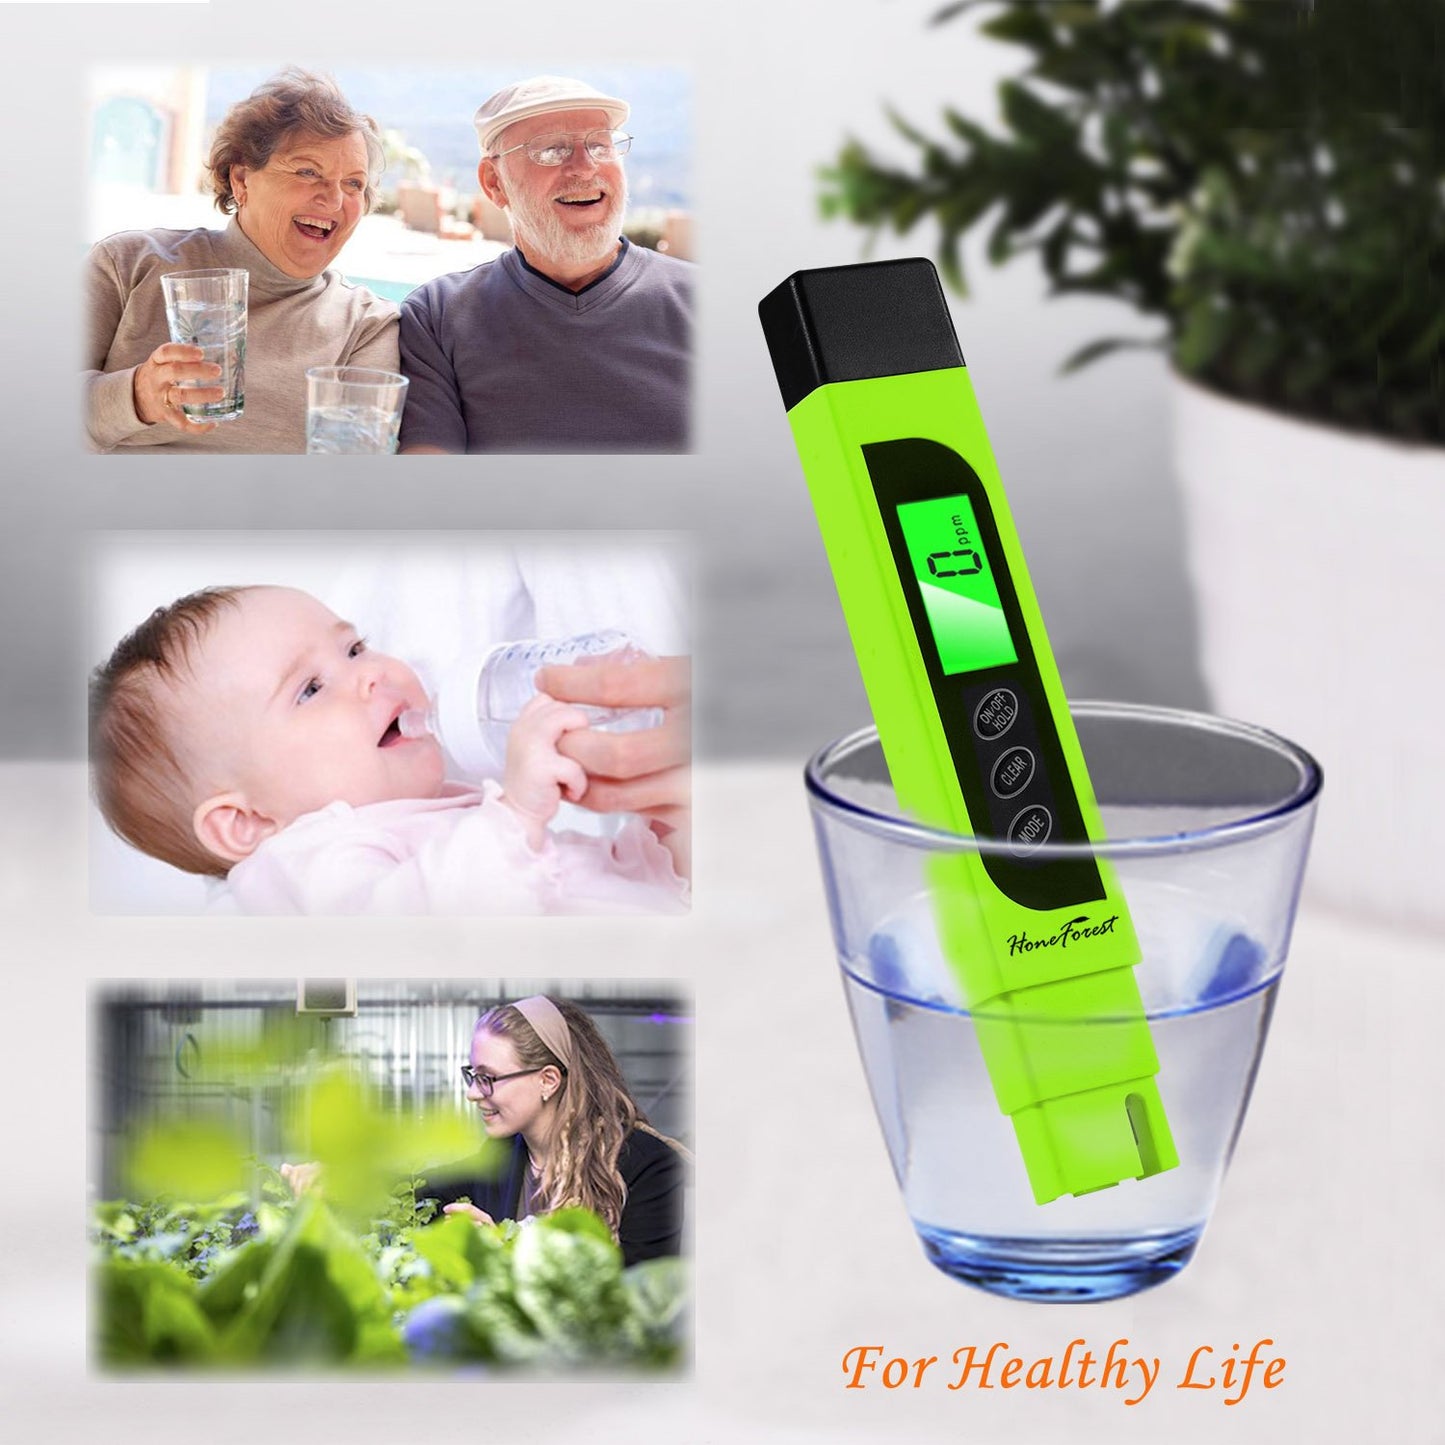 Digital TDS-Meter, Accurate and Reliable, HoneForest TDS, EC & Temp Meter 3 in 1, 0-9990ppm, Ideal Water-Tester-PPM-Meter(Green) - (For 8 piece(s))